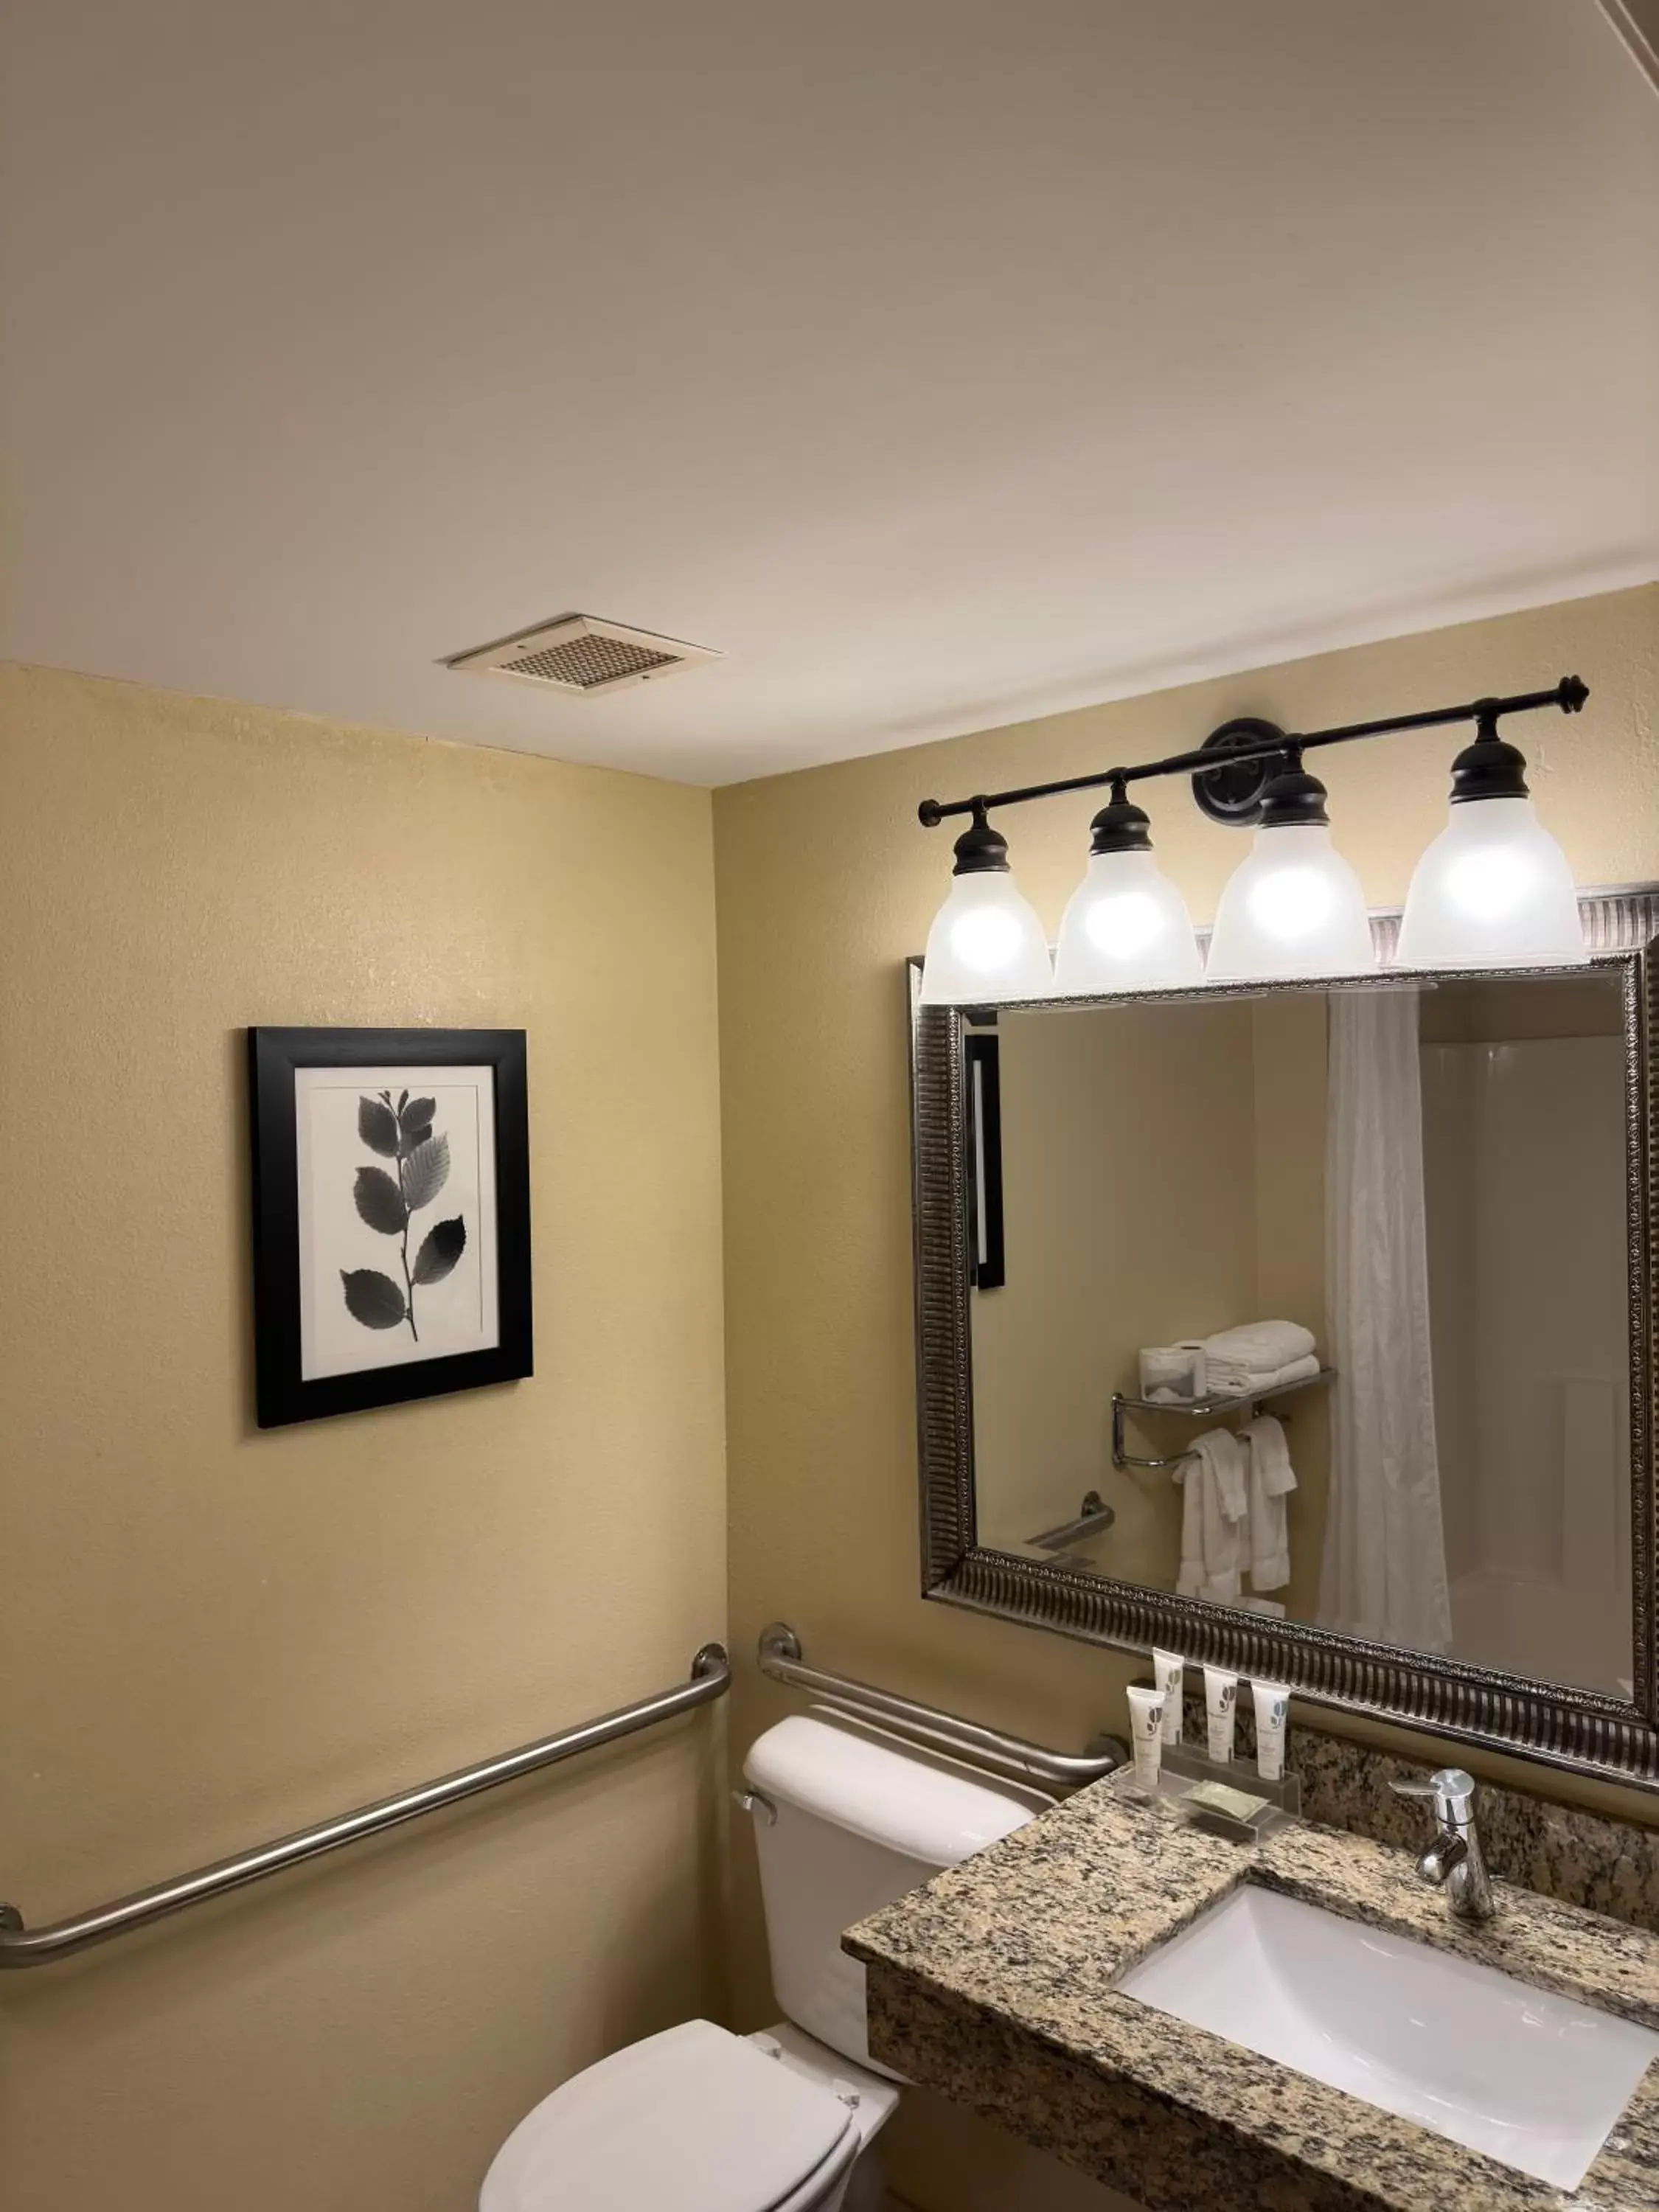 Bathroom in Country Inn & Suites by Radisson, Macedonia, OH